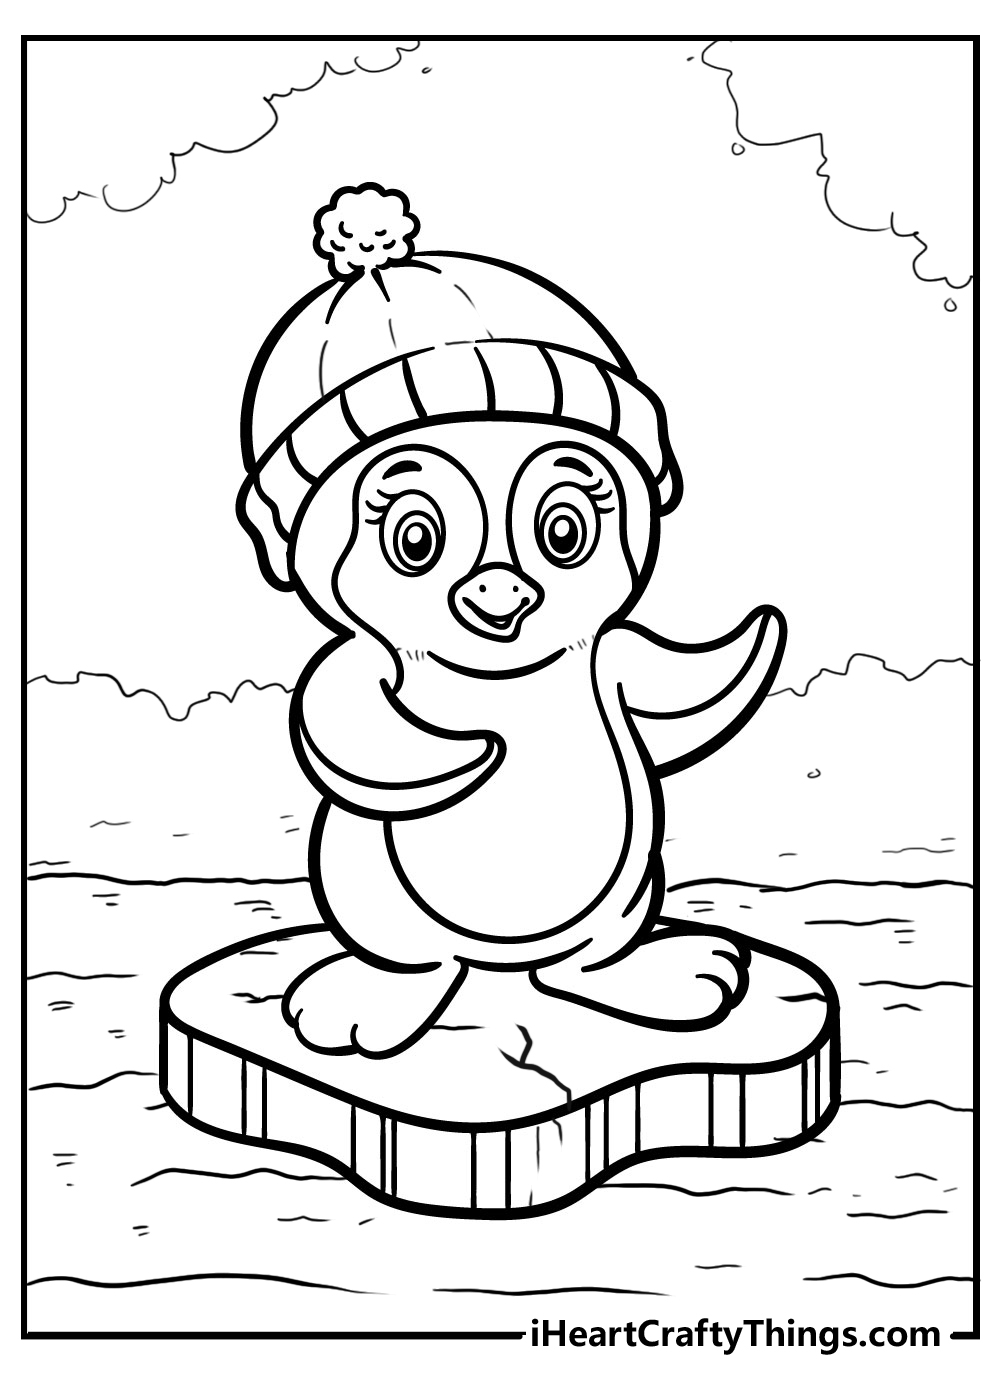 Penguin coloring pages free printables